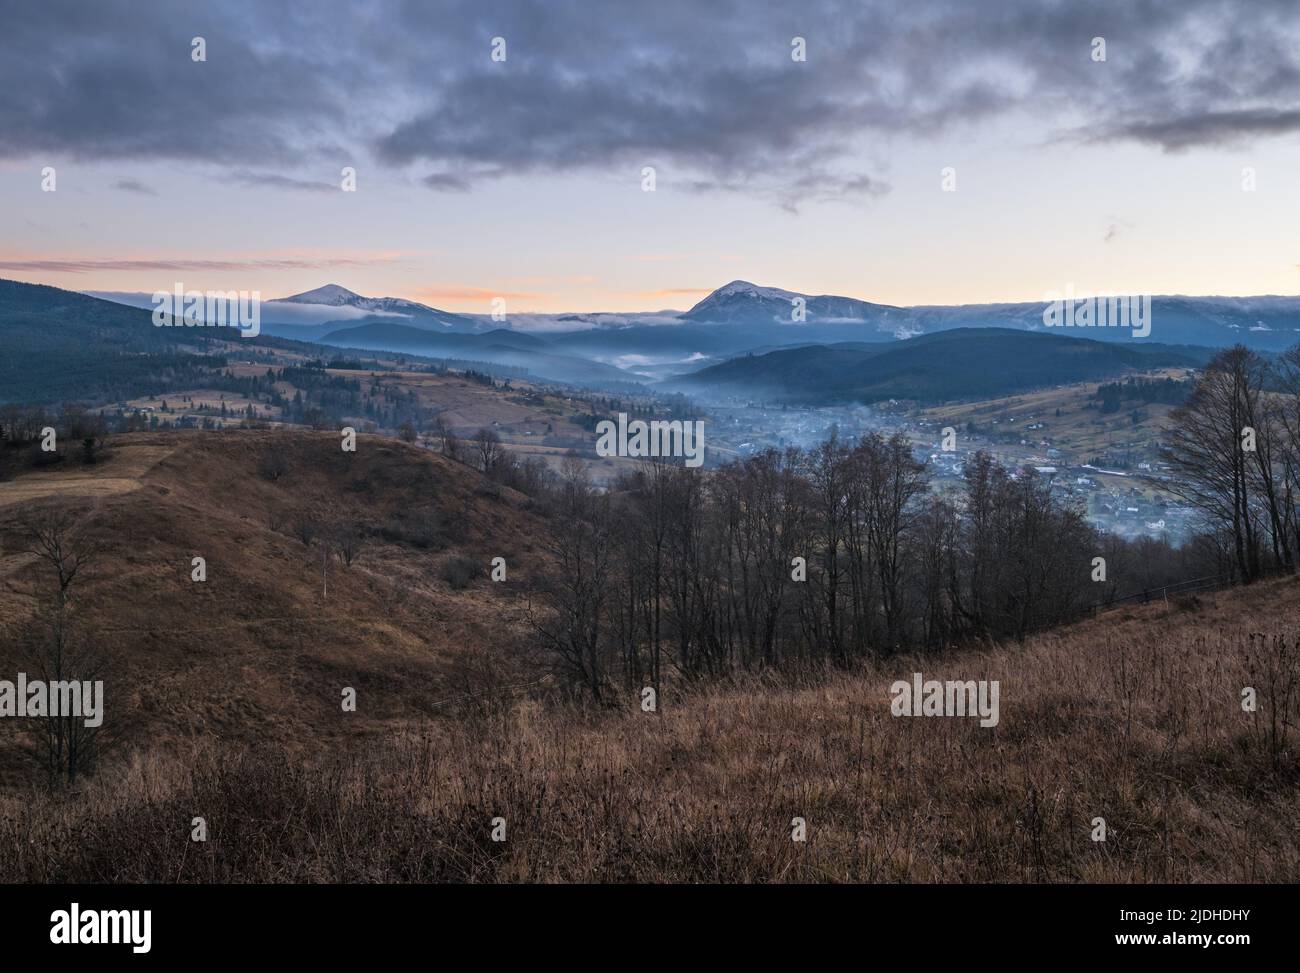 Picturesque pre sunrise morning above late autumn mountain countryside. Ukraine, Carpathian Mountains, Hoverla and Petros tops in far. Stock Photo